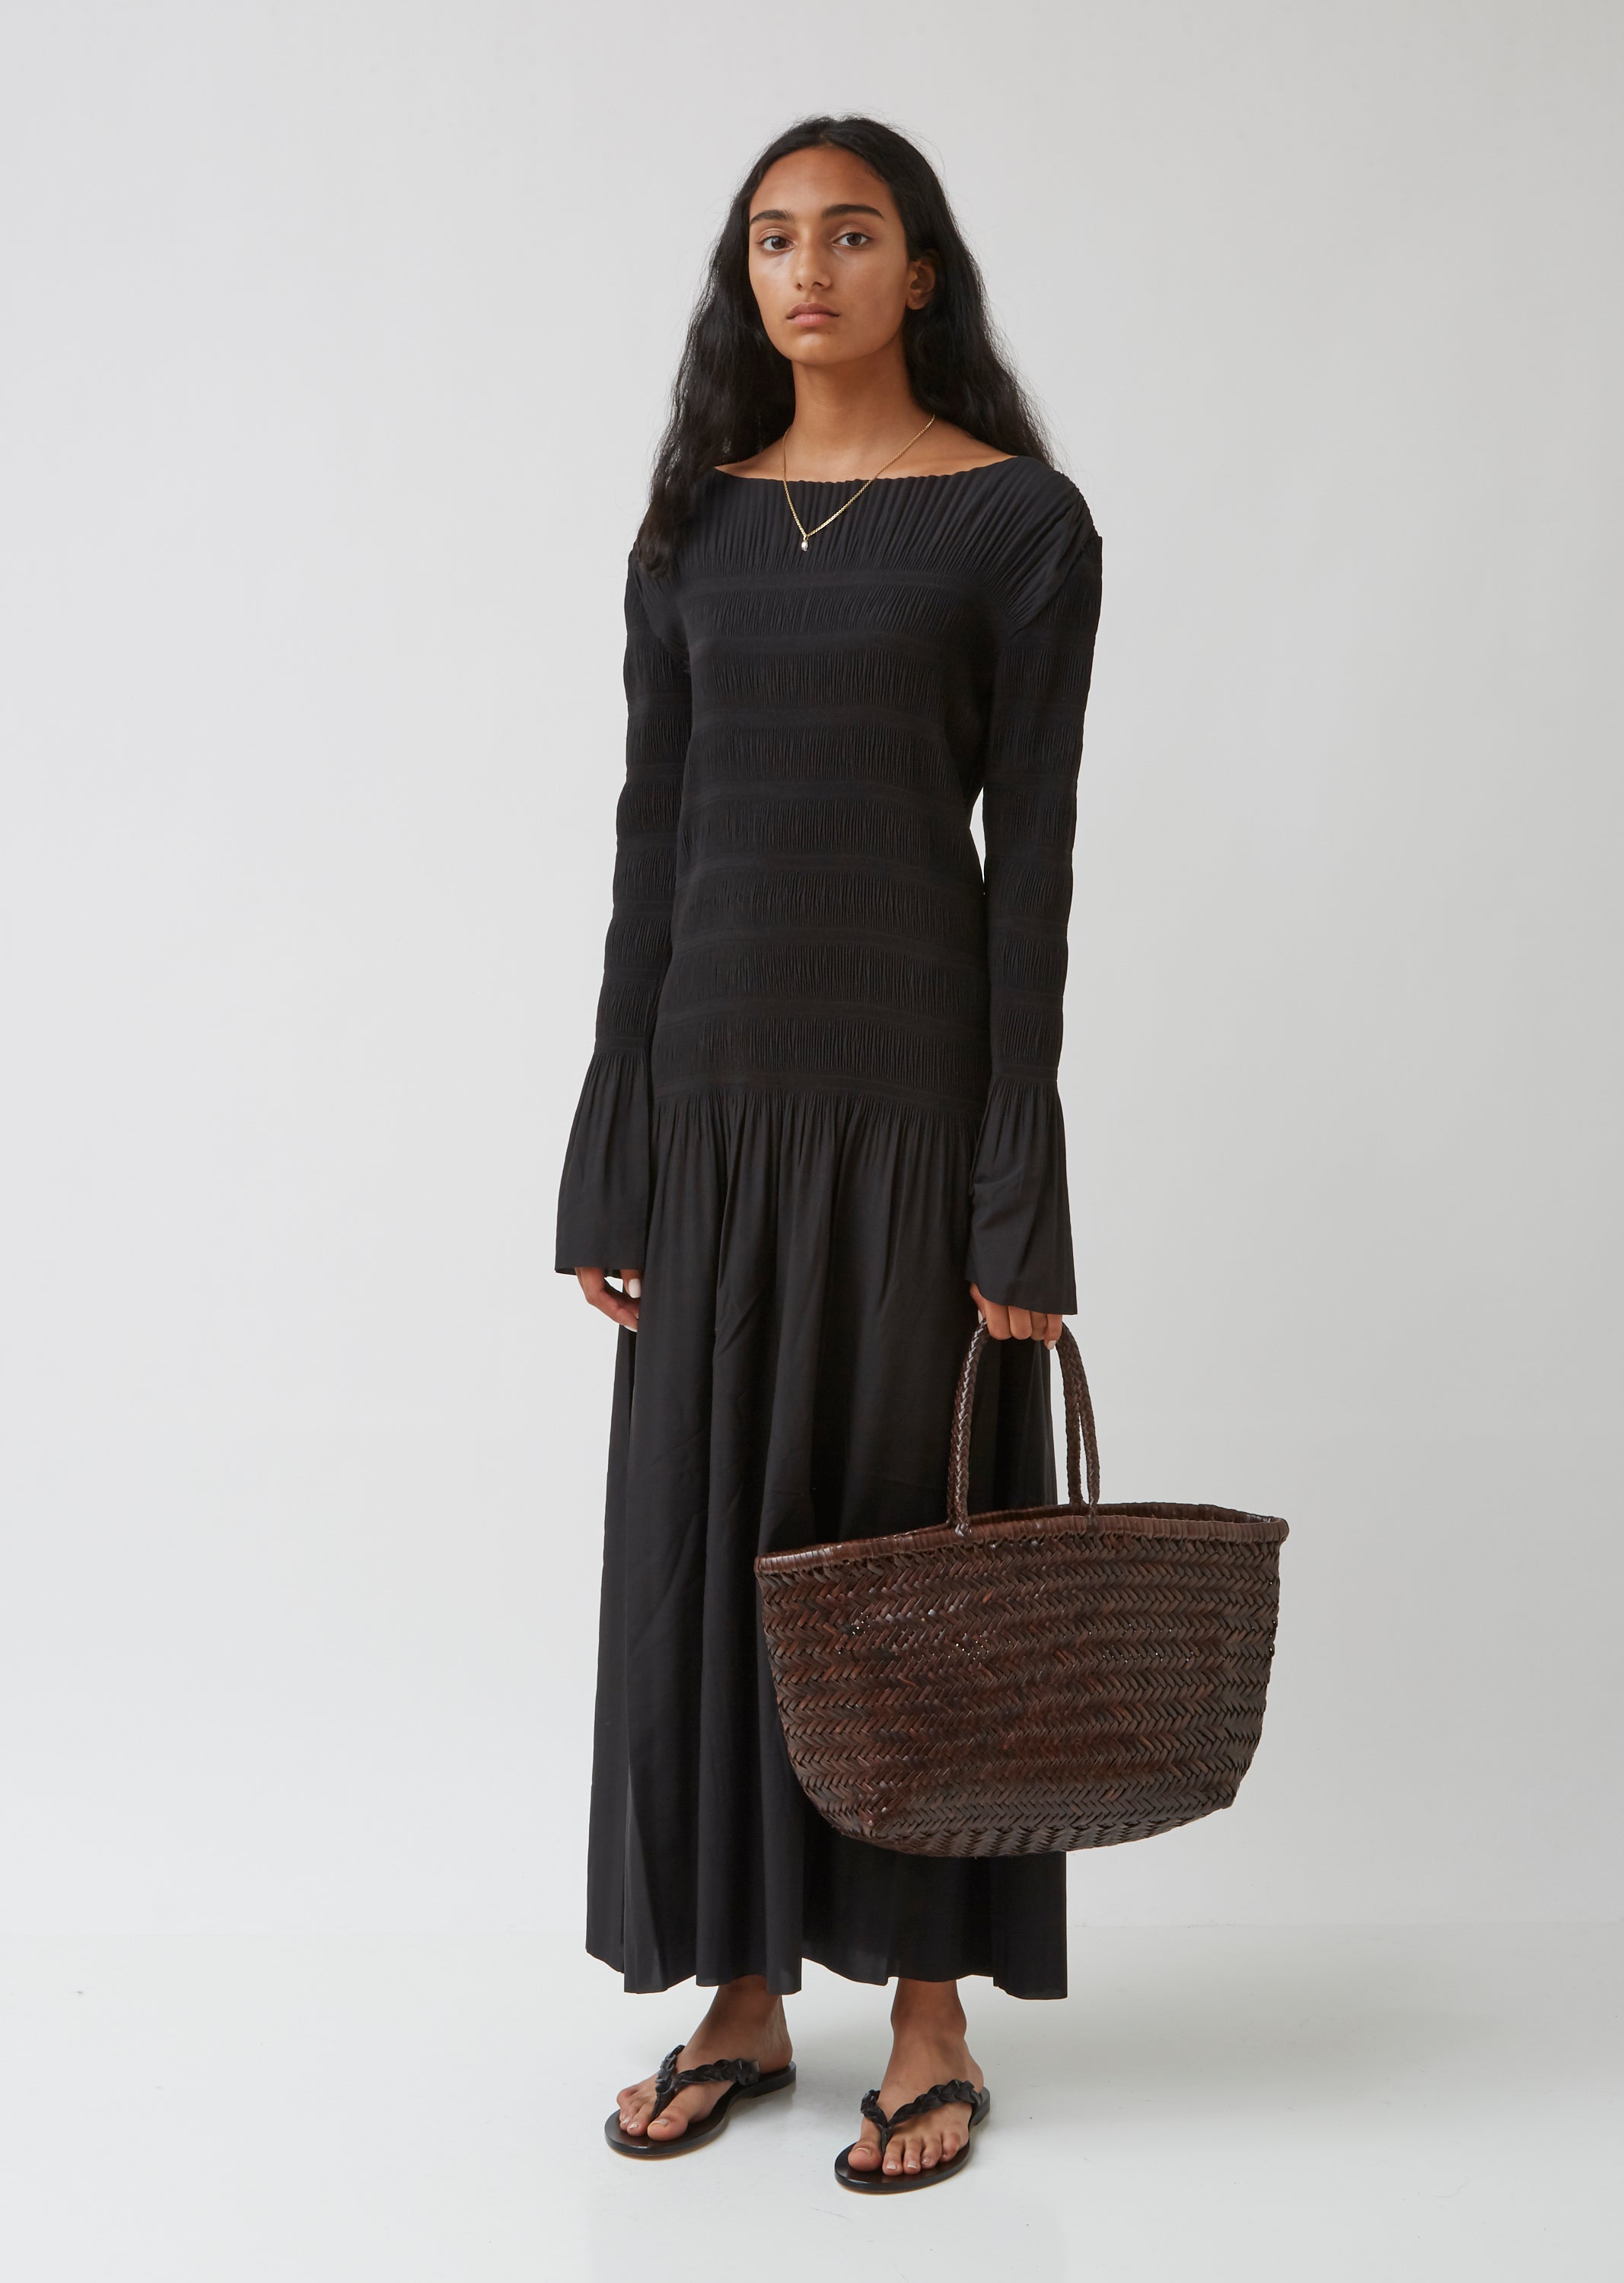 Maria Woven Leather Basket Bag in Cognac – Gaucho - Buenos Aires